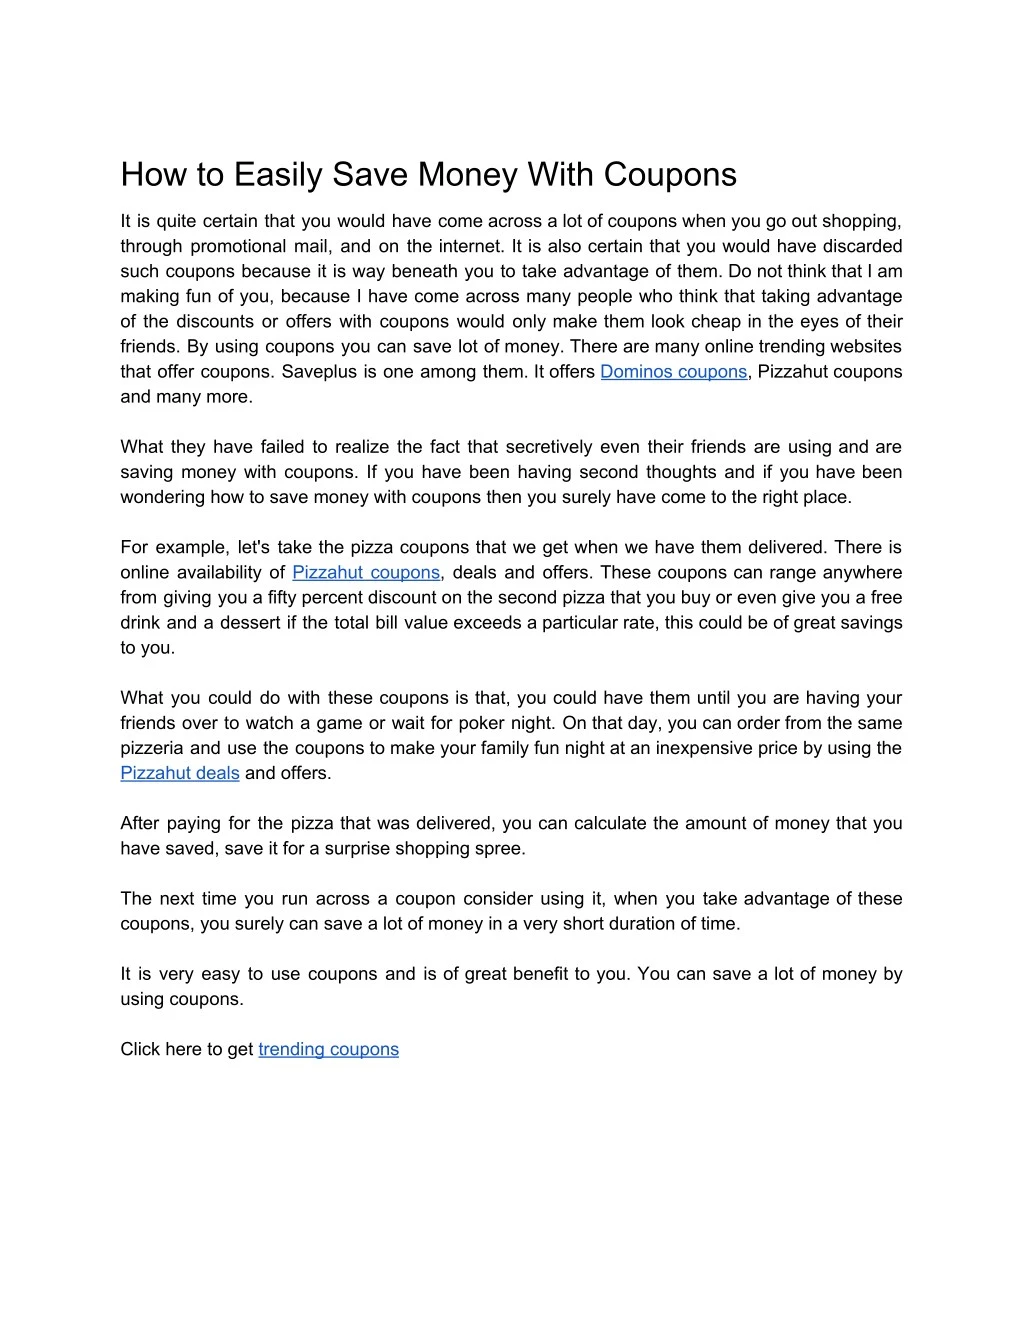 how to easily save money with coupons